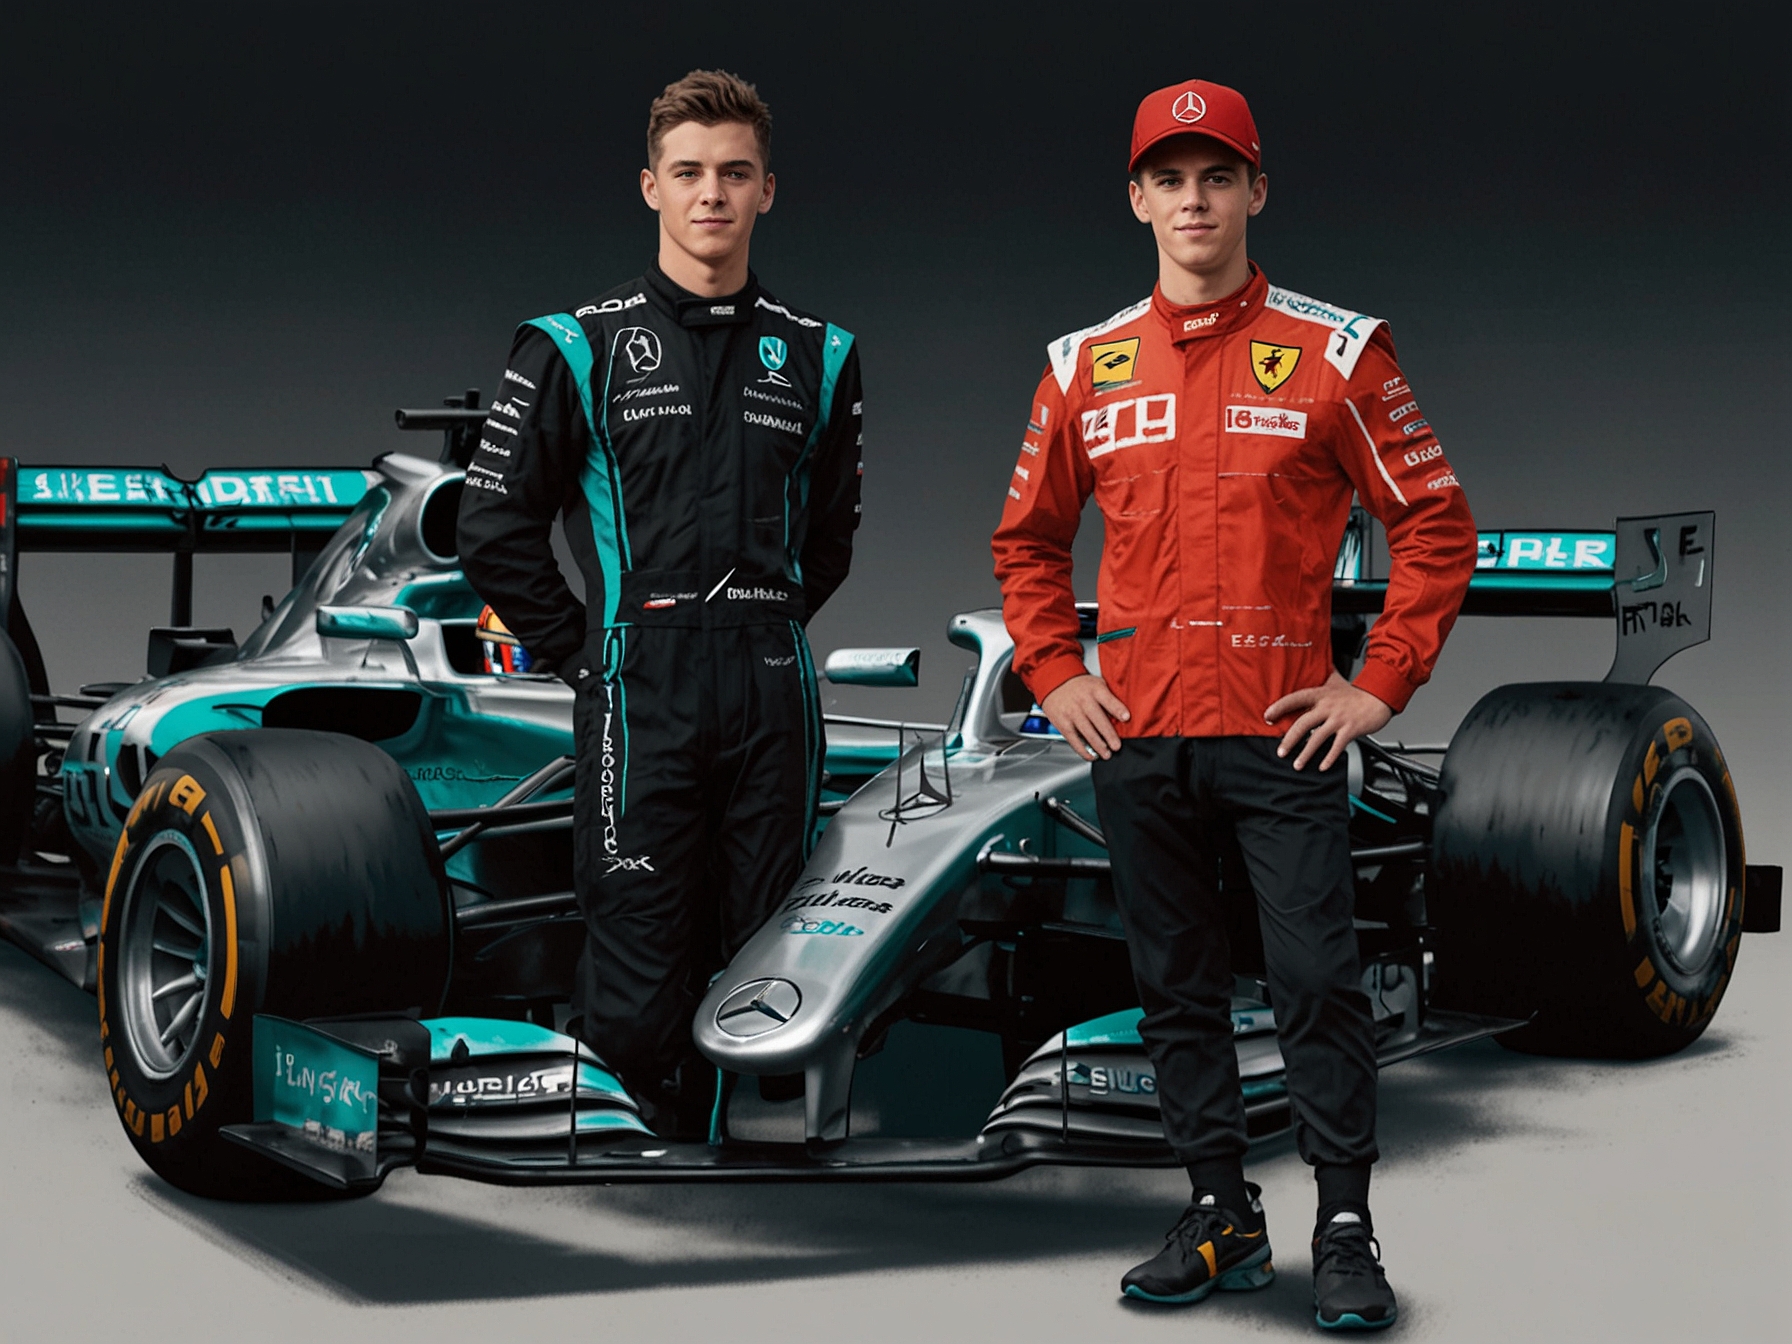 George Russell and Mick Schumacher stand together in front of the Mercedes W16 car. The Mercedes garage buzzes with activity, highlighting their youthful driver lineup for the 2025 F1 season.